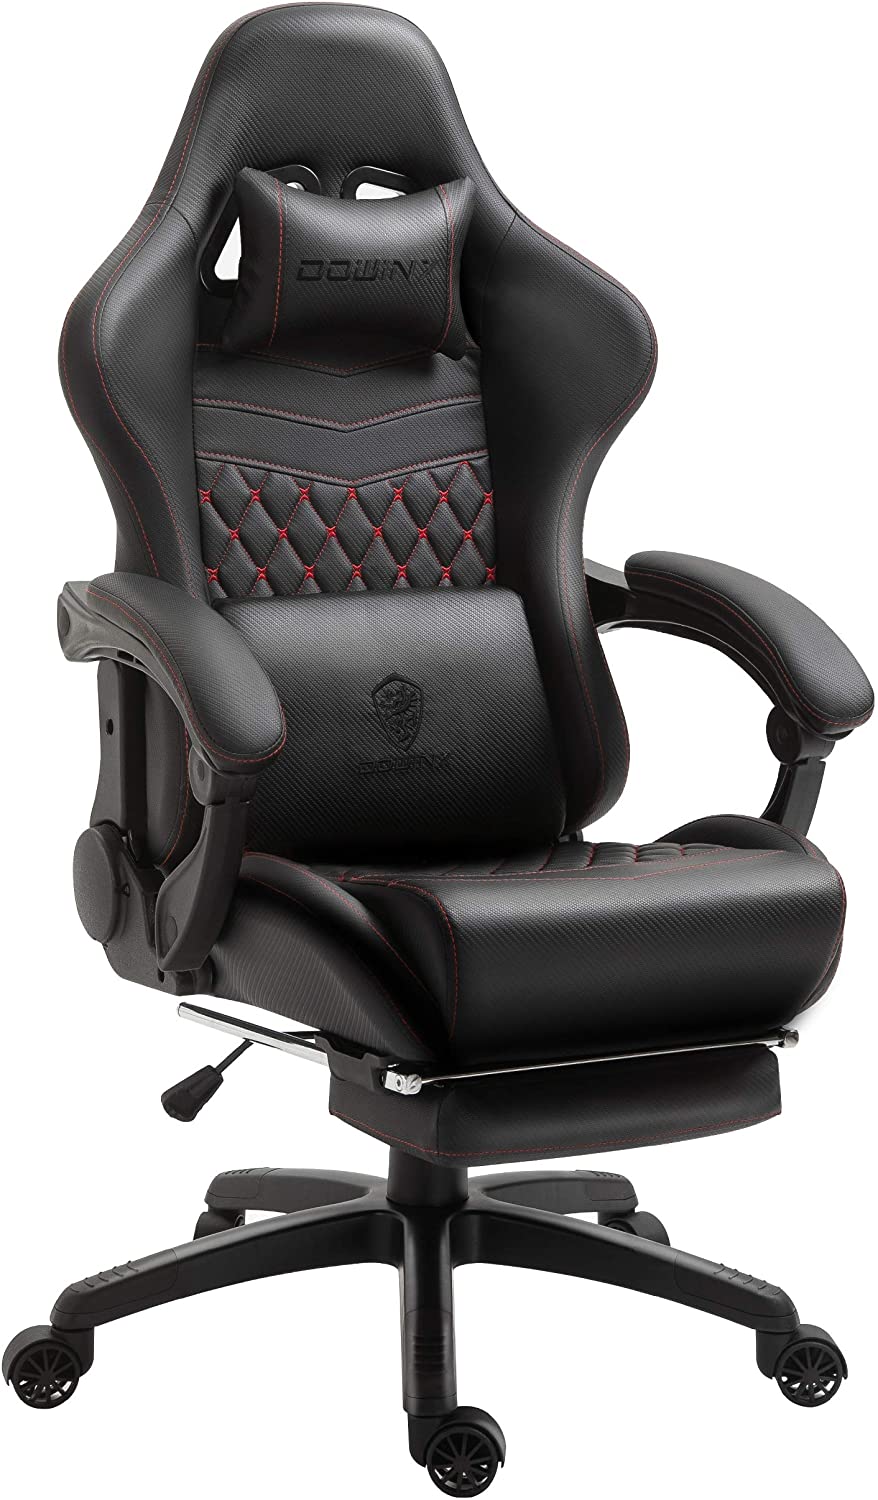 Dowinx Gaming Chair 